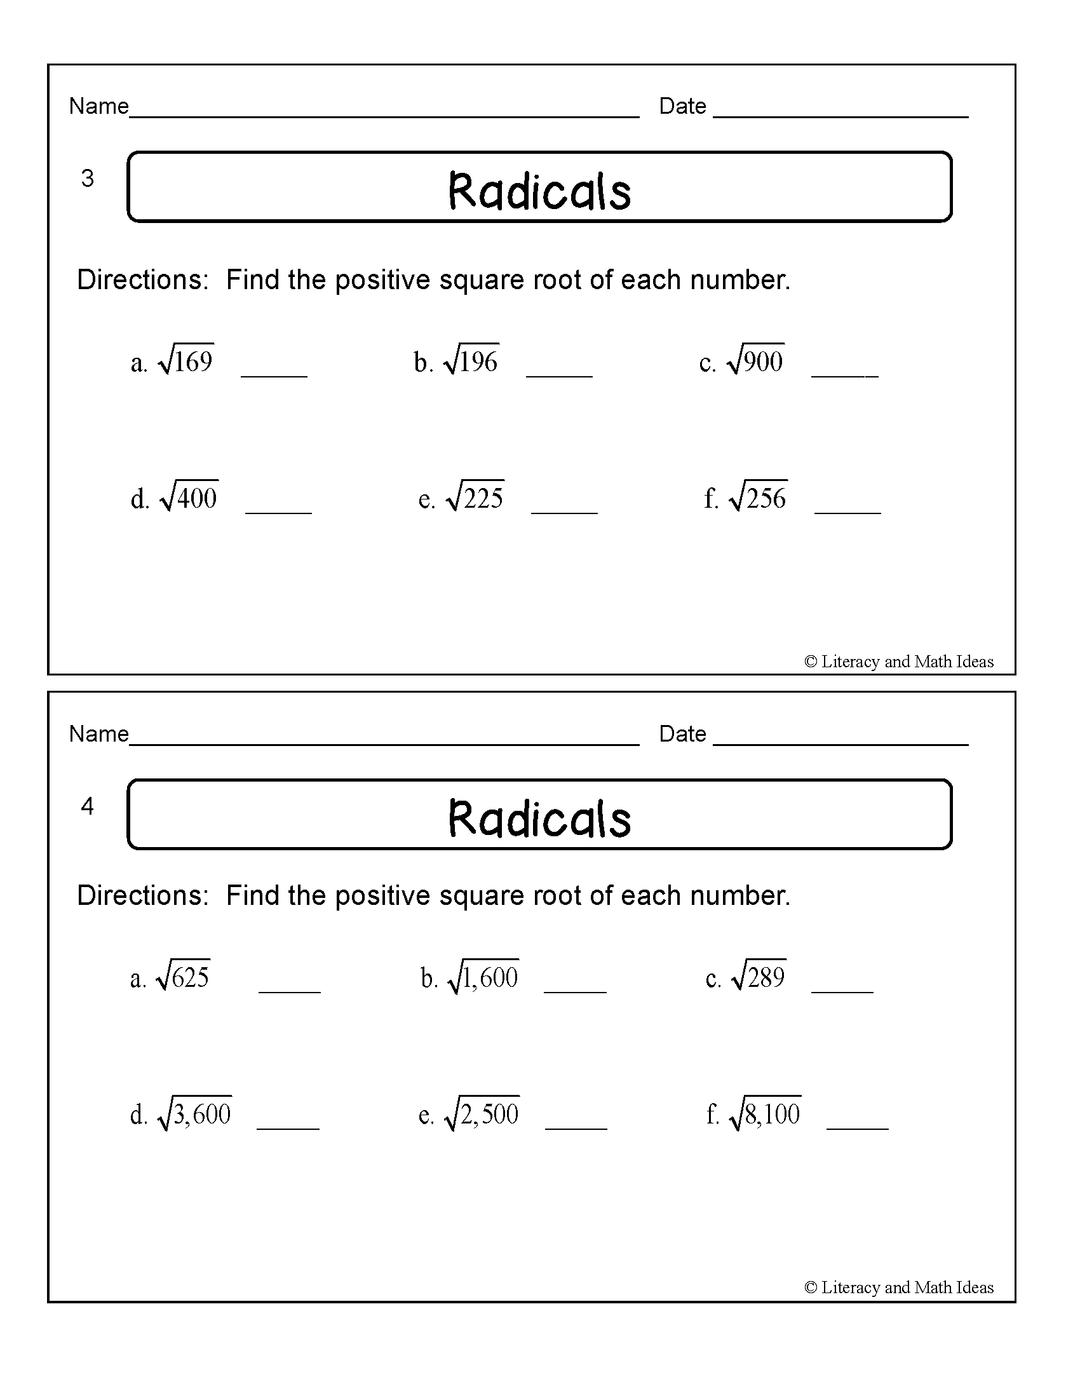 Radicals Exit Slips (Quick Square Roots Review)